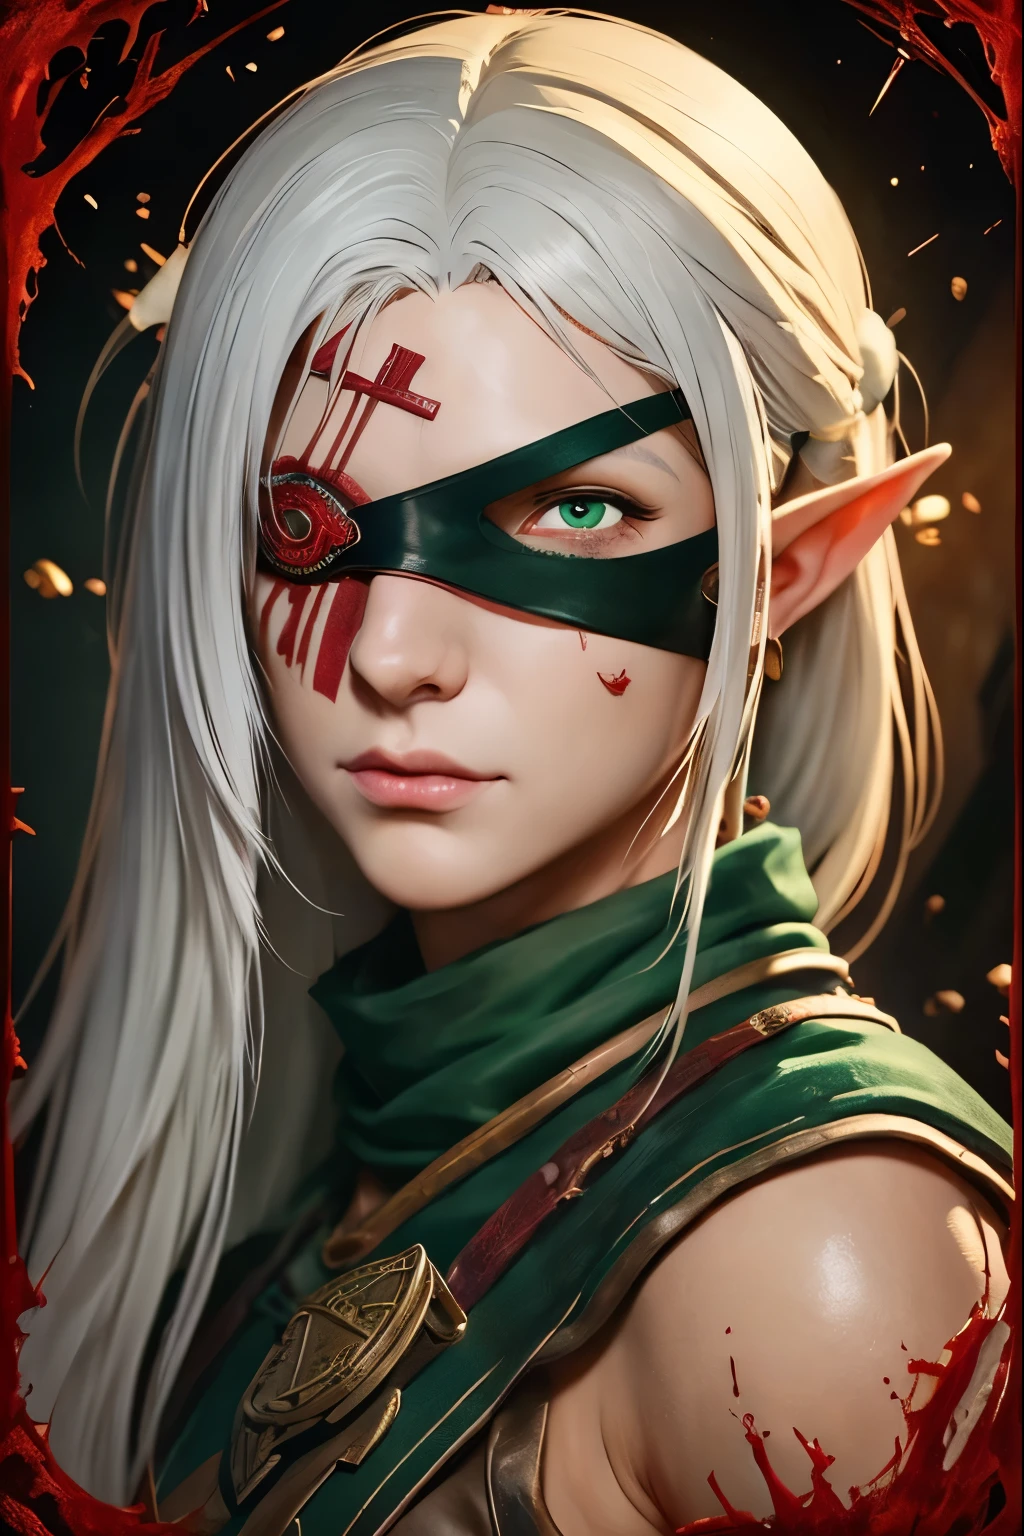 (Ultra-detailed face, One eye with an eye patch), (Fantasy Illustration with Gothic & Ukiyo-e & Comic Art), (Full Body, A middle-aged elf woman with white hair, blunt bangs, Very Very long disheveled hair, dark purple skin, lavender eyes), (She is wrapped all over with bandages soaked with formalin and various green, yellow, and red chemicals), (She is bandaged all over like a mummy with one eye, wearing a leather eye patch with rubies, and perched on a rock), BREAK (In the background, one can see a red sandstorm swell desert and a tomb made of red stone, red small moon)